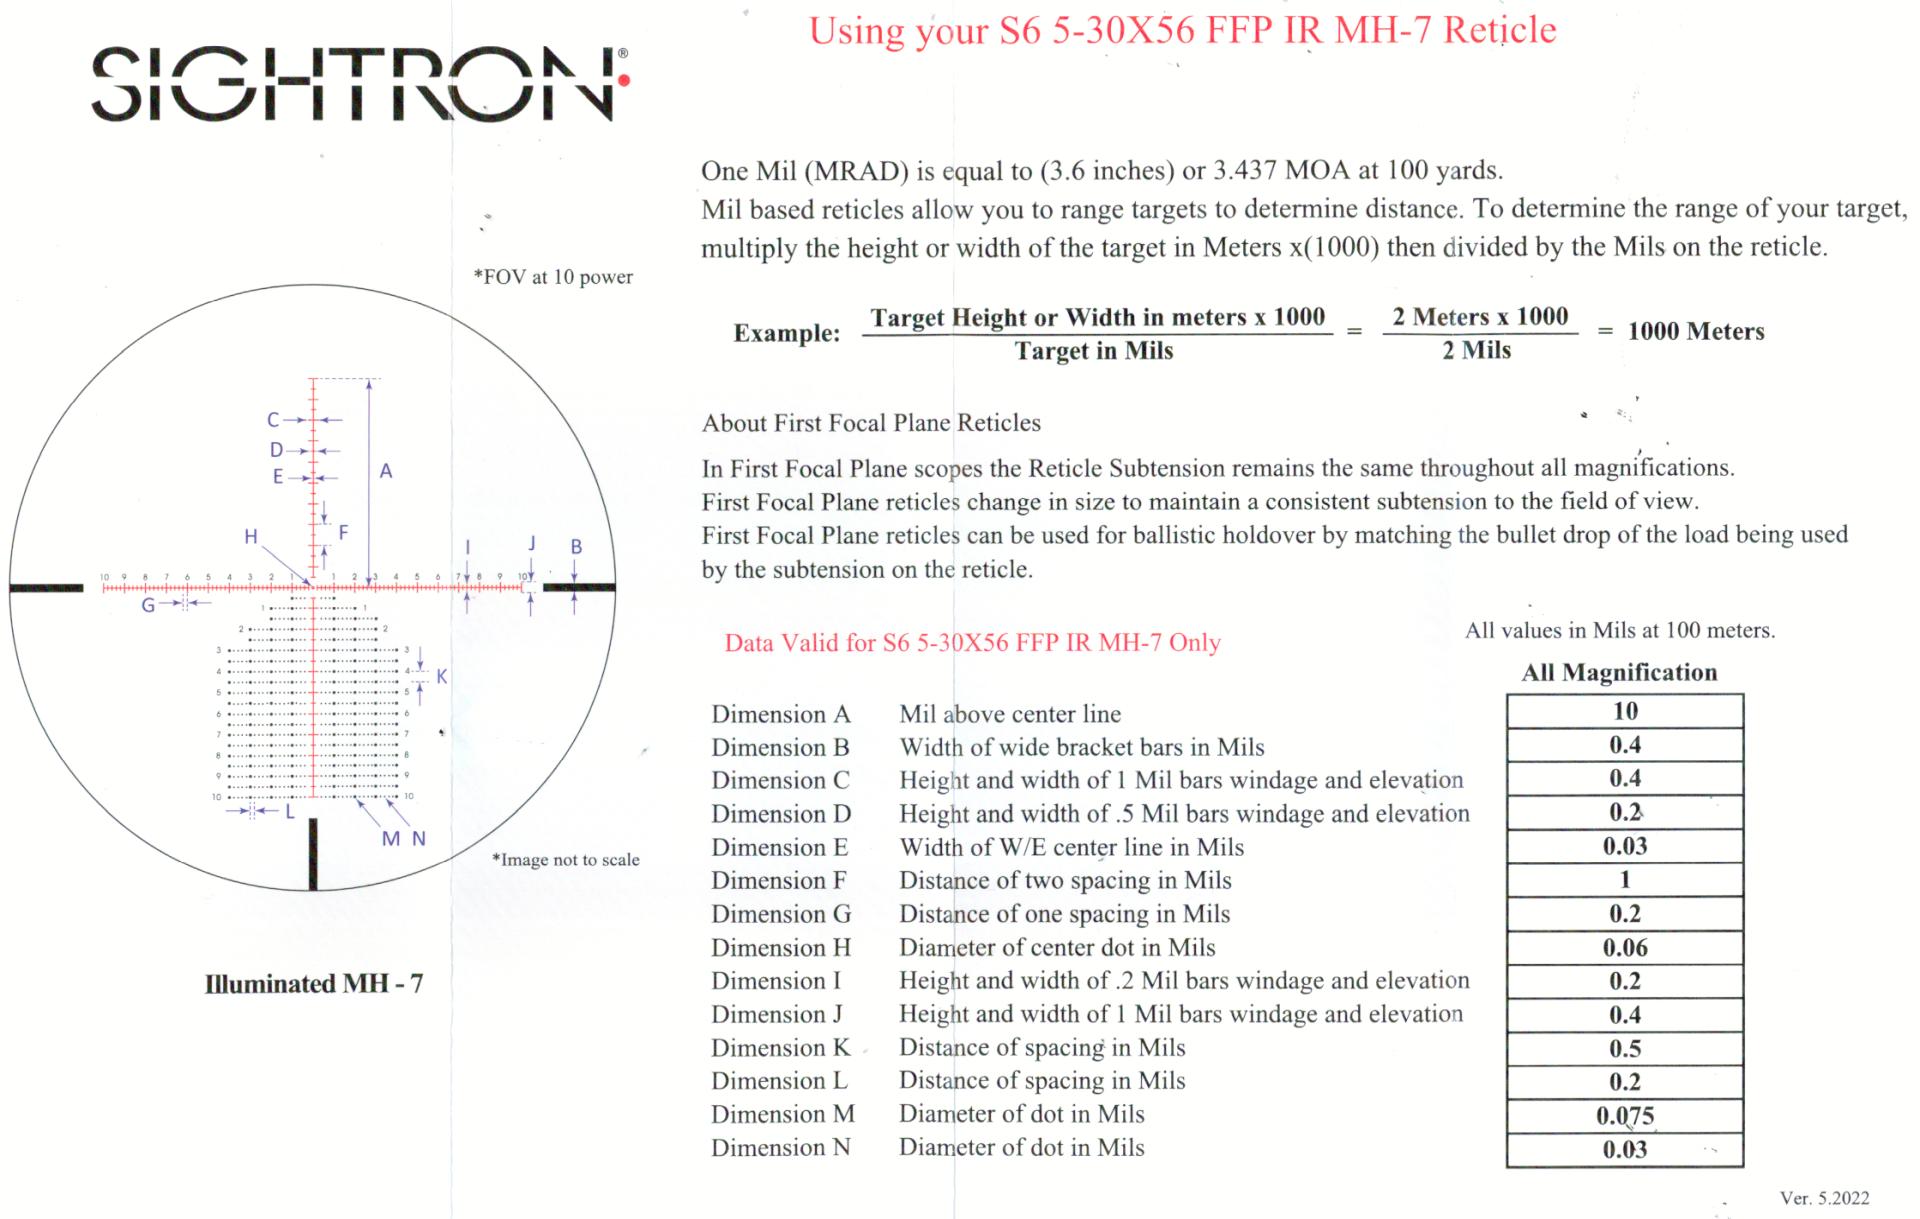 The dimensioned reticle diagram for the MH-7 mil reticle included with the Sightron S6 5-30x56 FFP IR